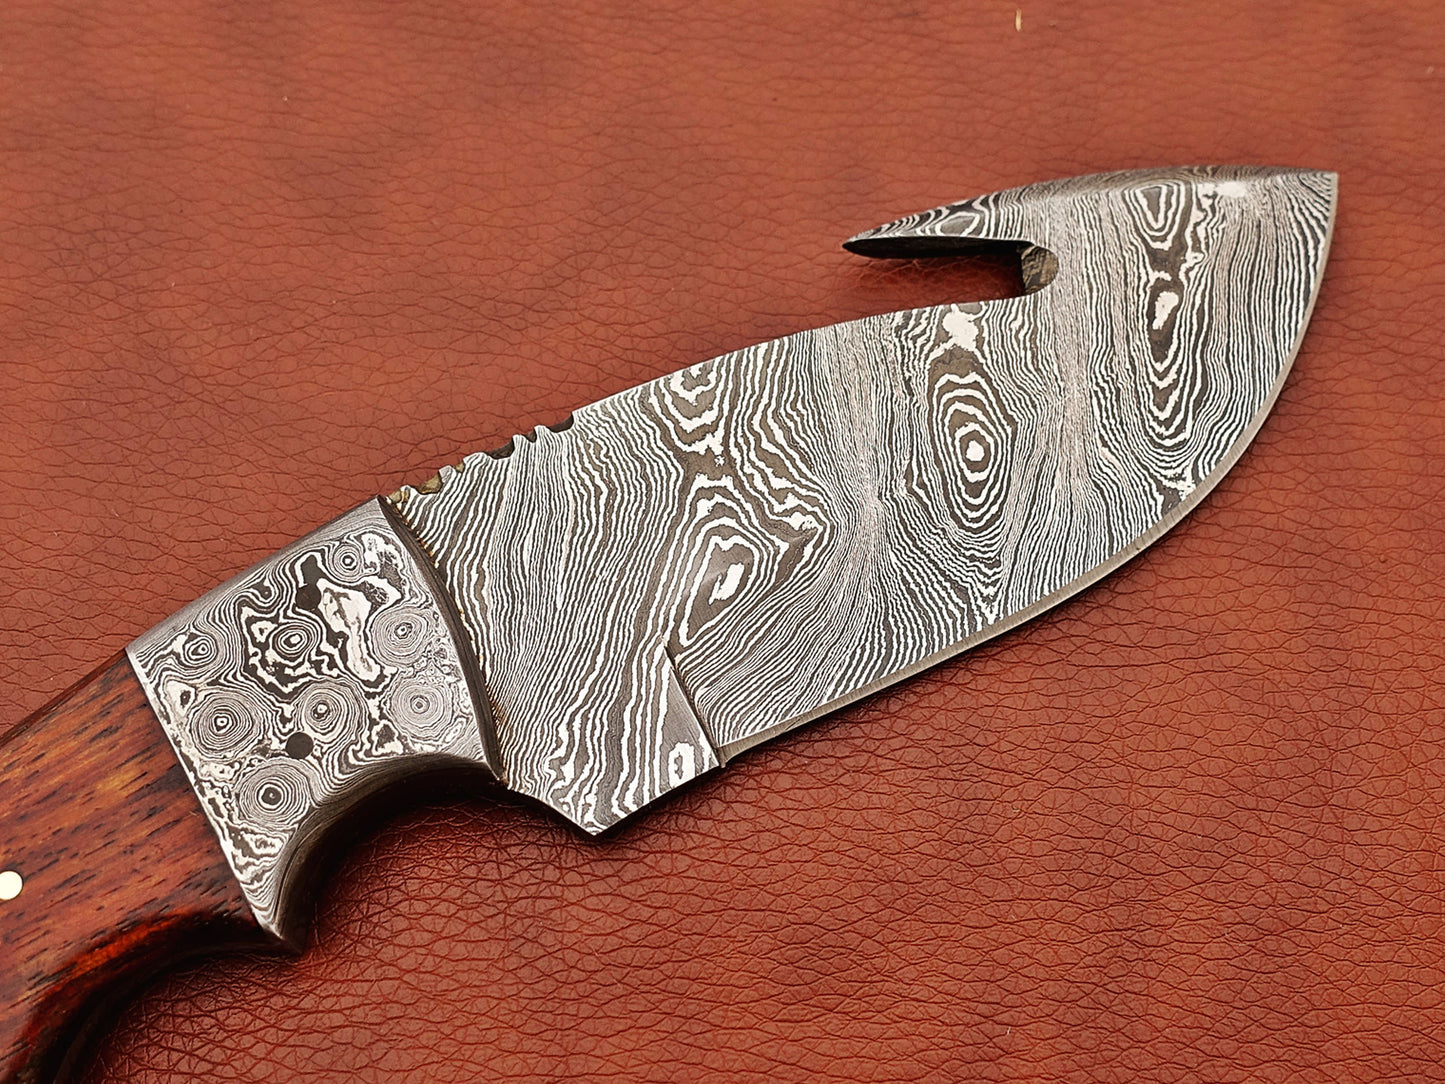 9.5" long Damascus steel Rain drop pattern Gut hook skinning knife, Full tang blade available in 4 colors, includes Cow hide Leather sheath